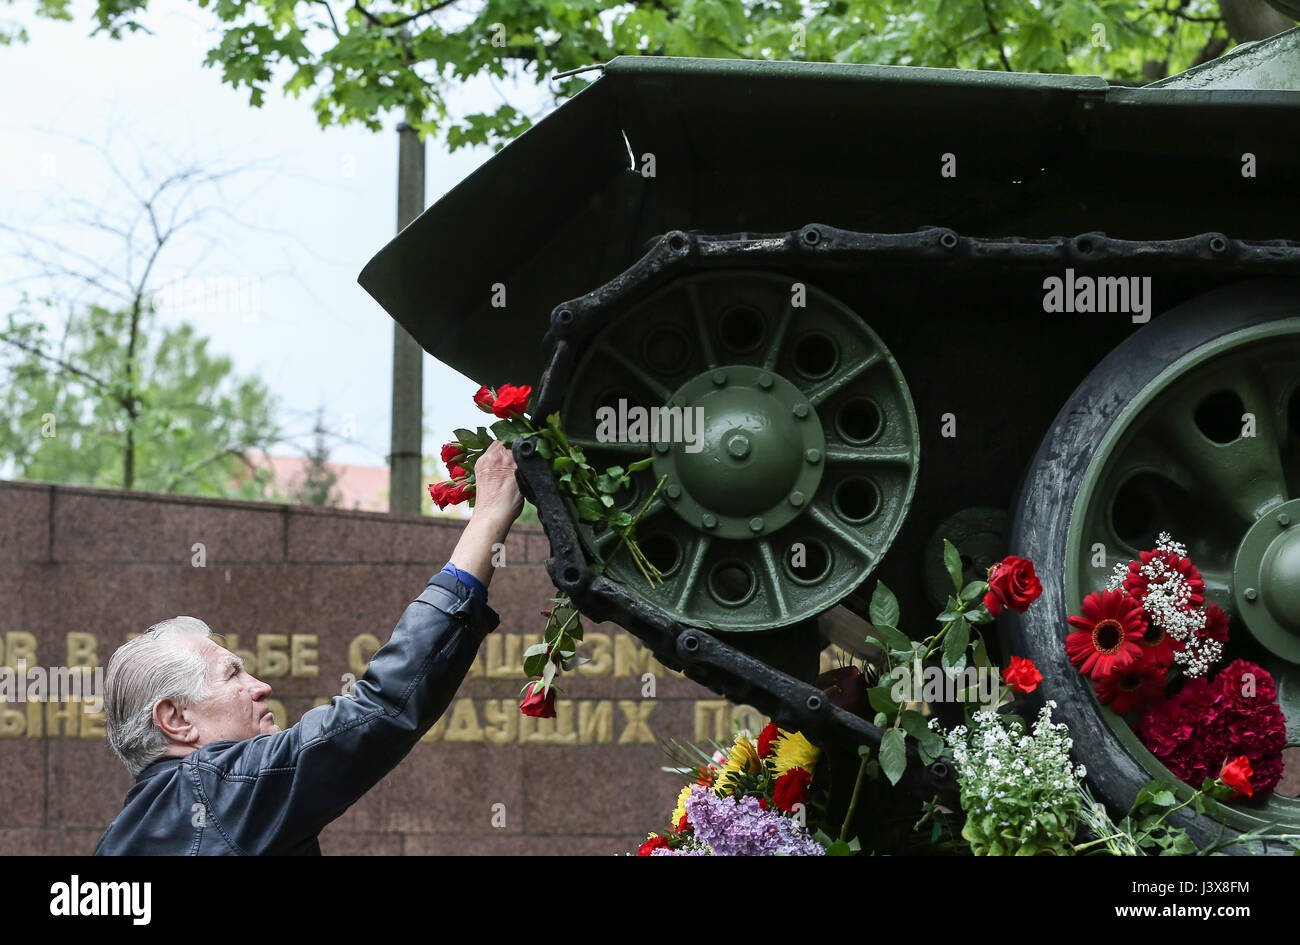 Berlin, Germany. 8th May, 2017. A man presents flowers near a tank model during a series of memorial activities to commemorate the 72nd anniversary of the end of World World II in Europe, known as Victory in Europe Day at German-Russian Museum in Berlin, capital of Germany, on May 8, 2017. Credit: Shan Yuqi/Xinhua/Alamy Live News Stock Photo